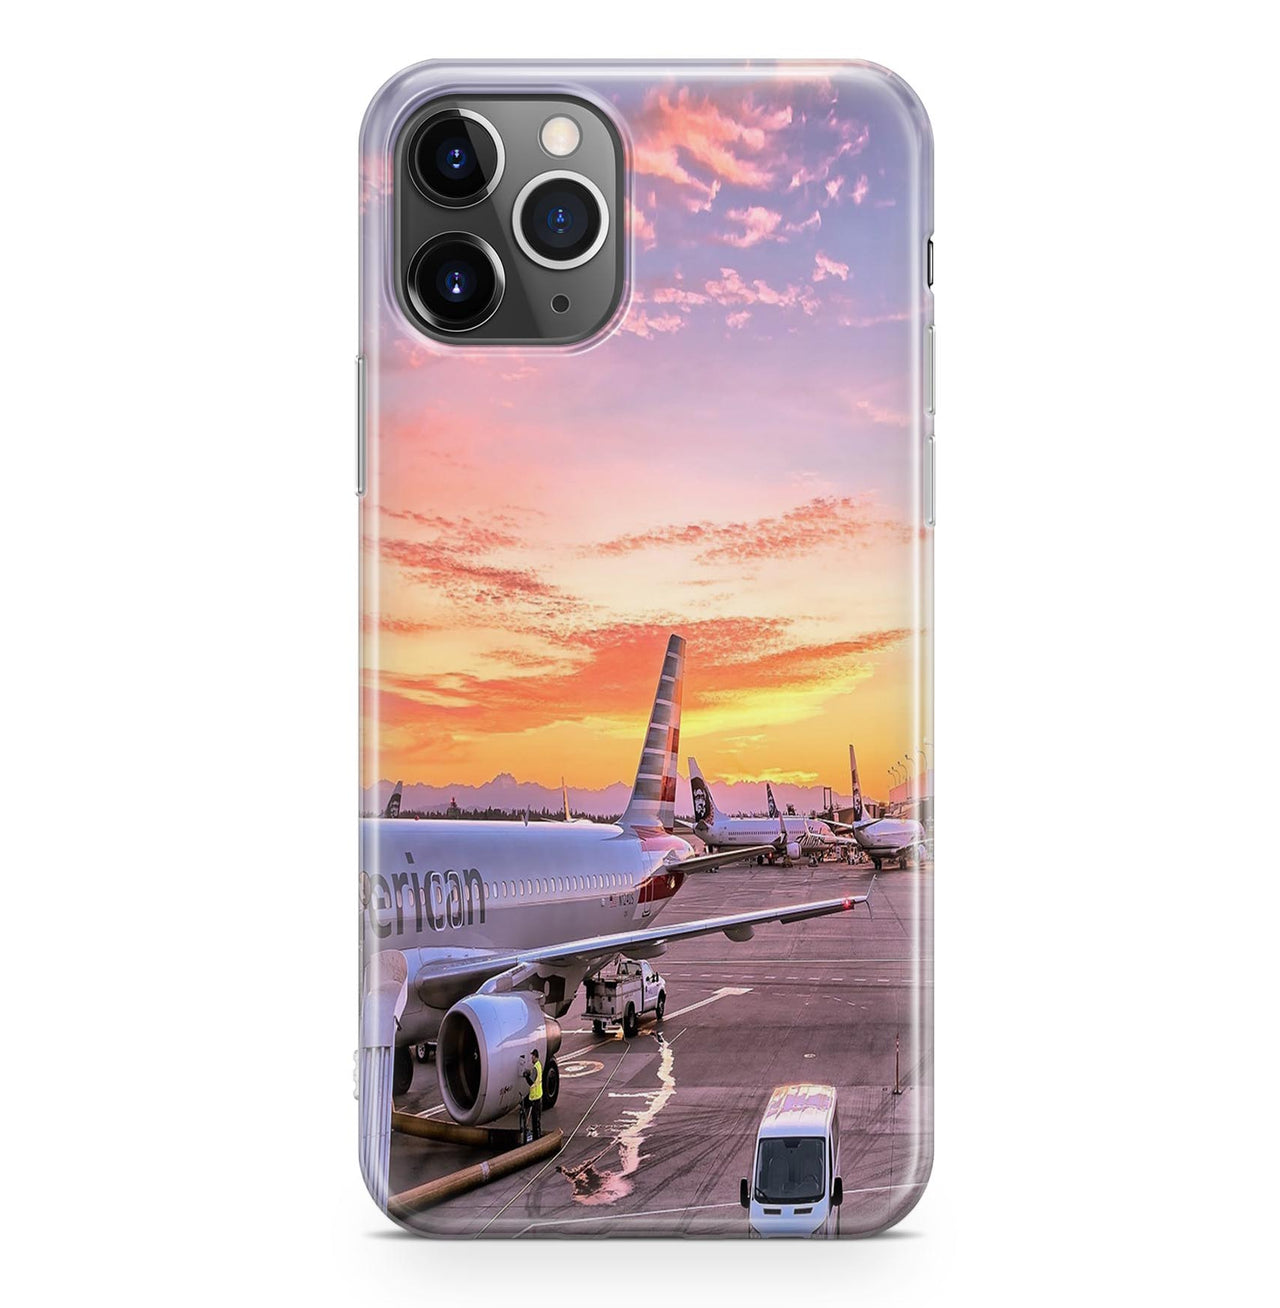 Airport Photo During Sunset Designed iPhone Cases